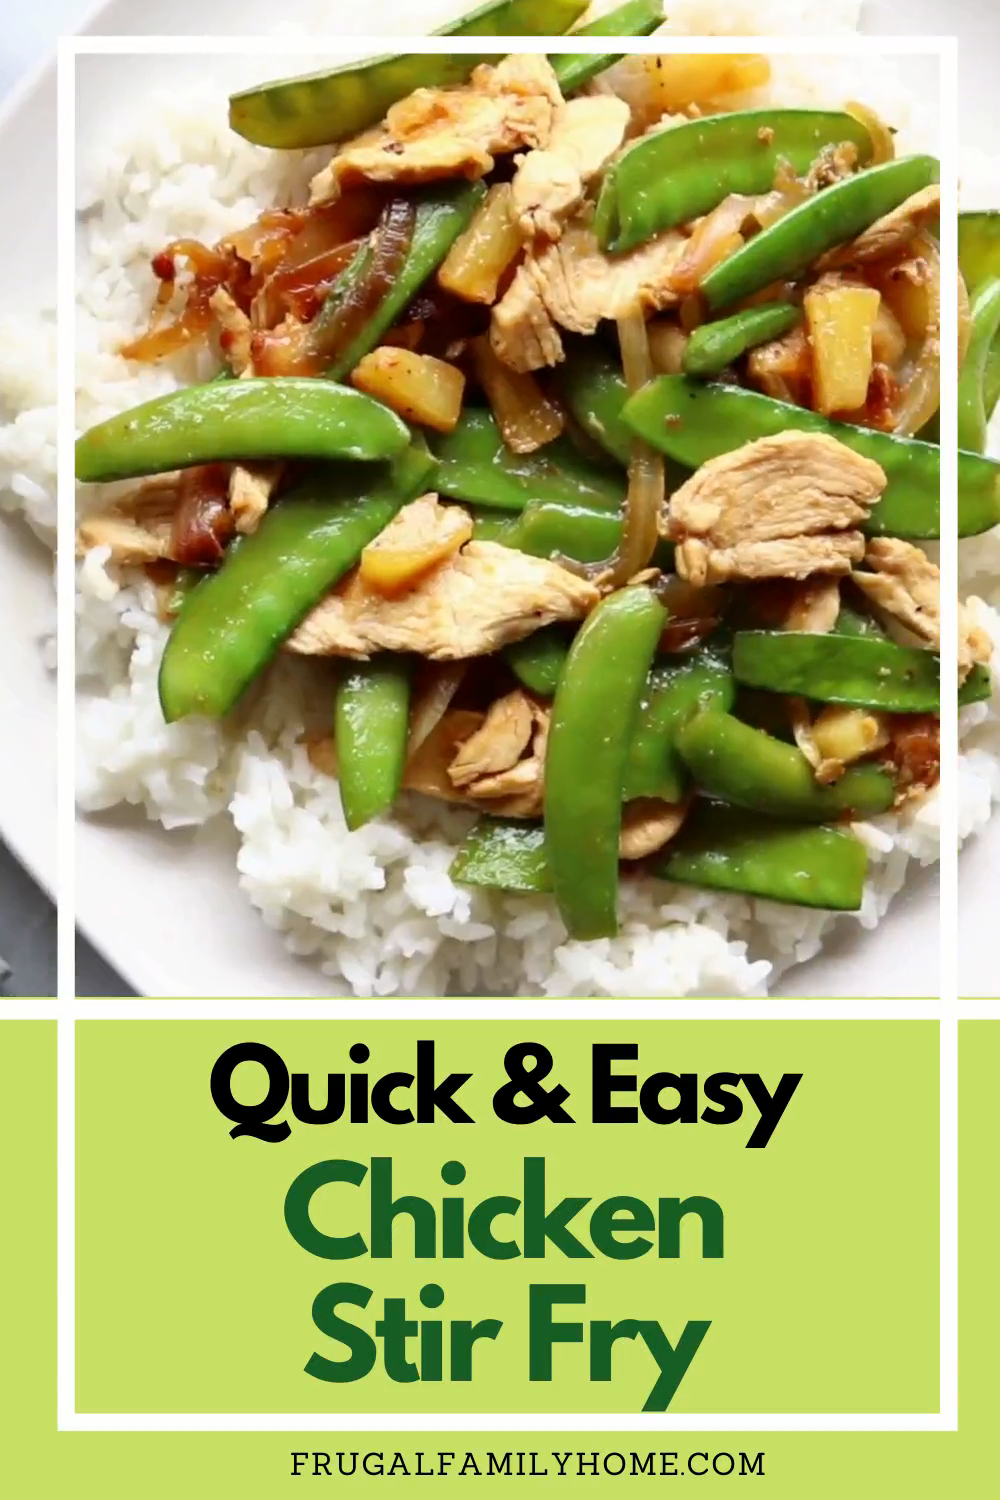 The Best Chicken Stir Fry Recipe, Have Dinner Ready in 20 Minutes -   19 healthy recipes Pasta stir fry ideas